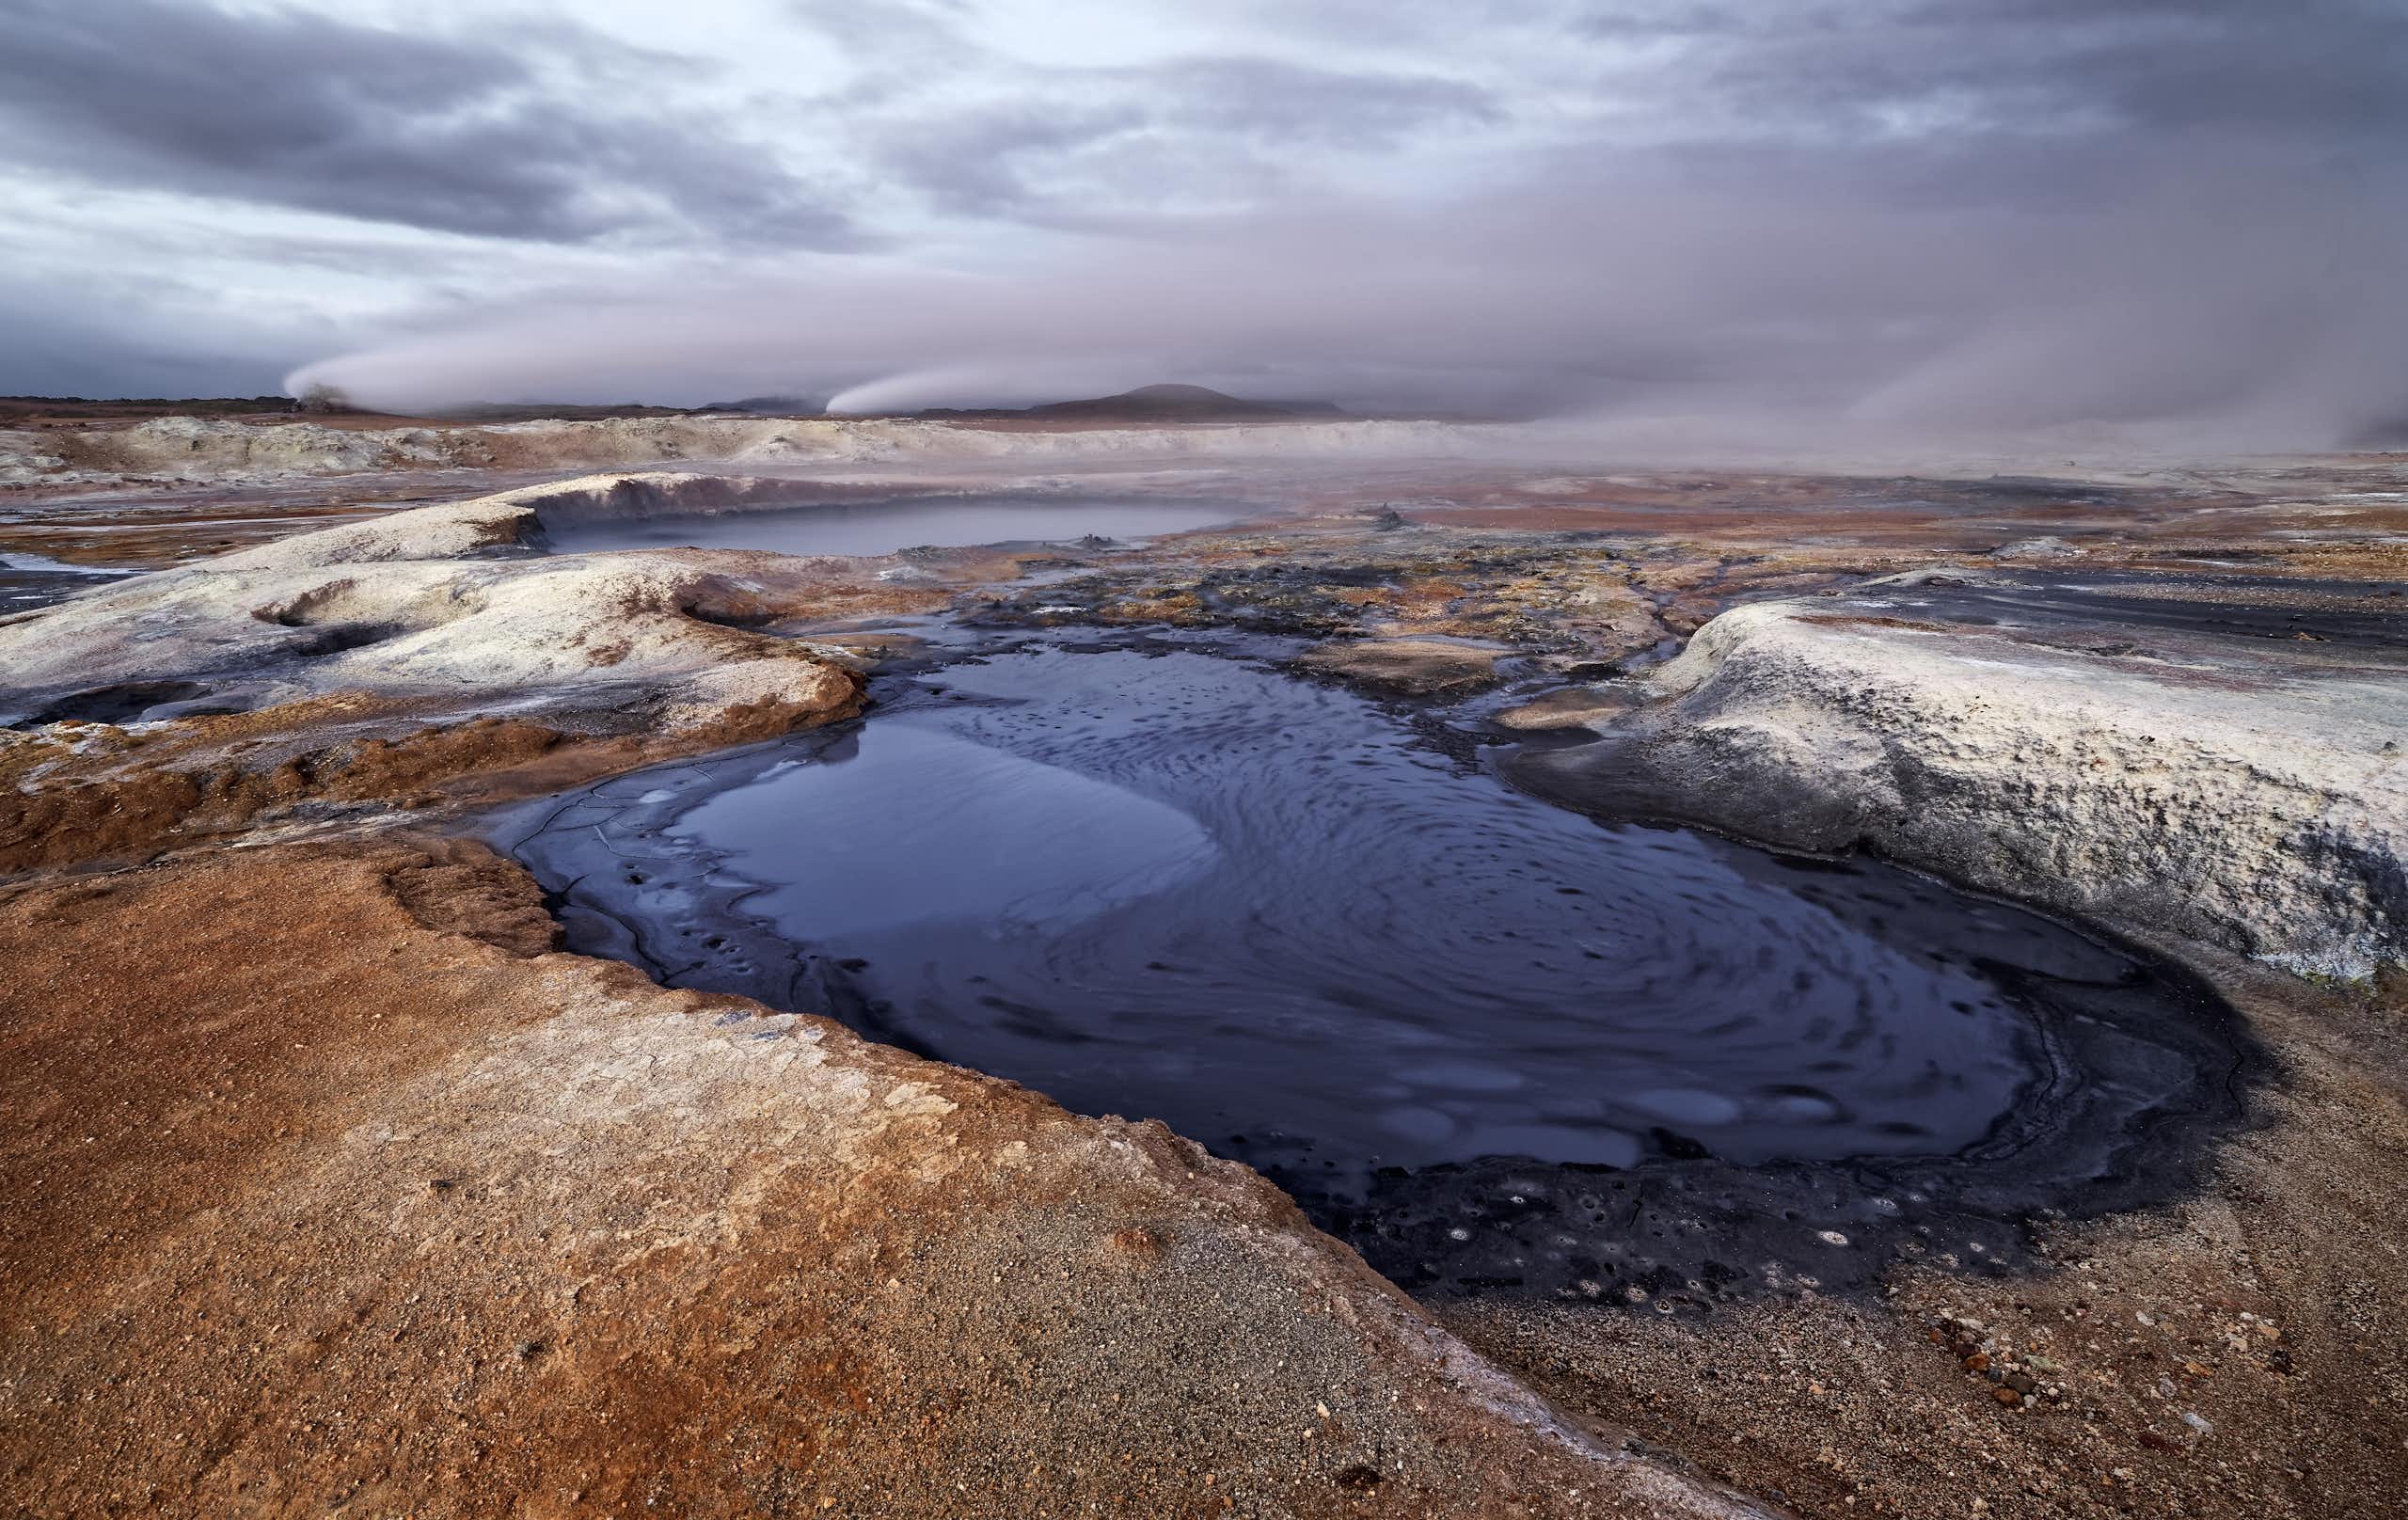 A barren volcanic landscape with a small pool of dark blue water at the forefront.